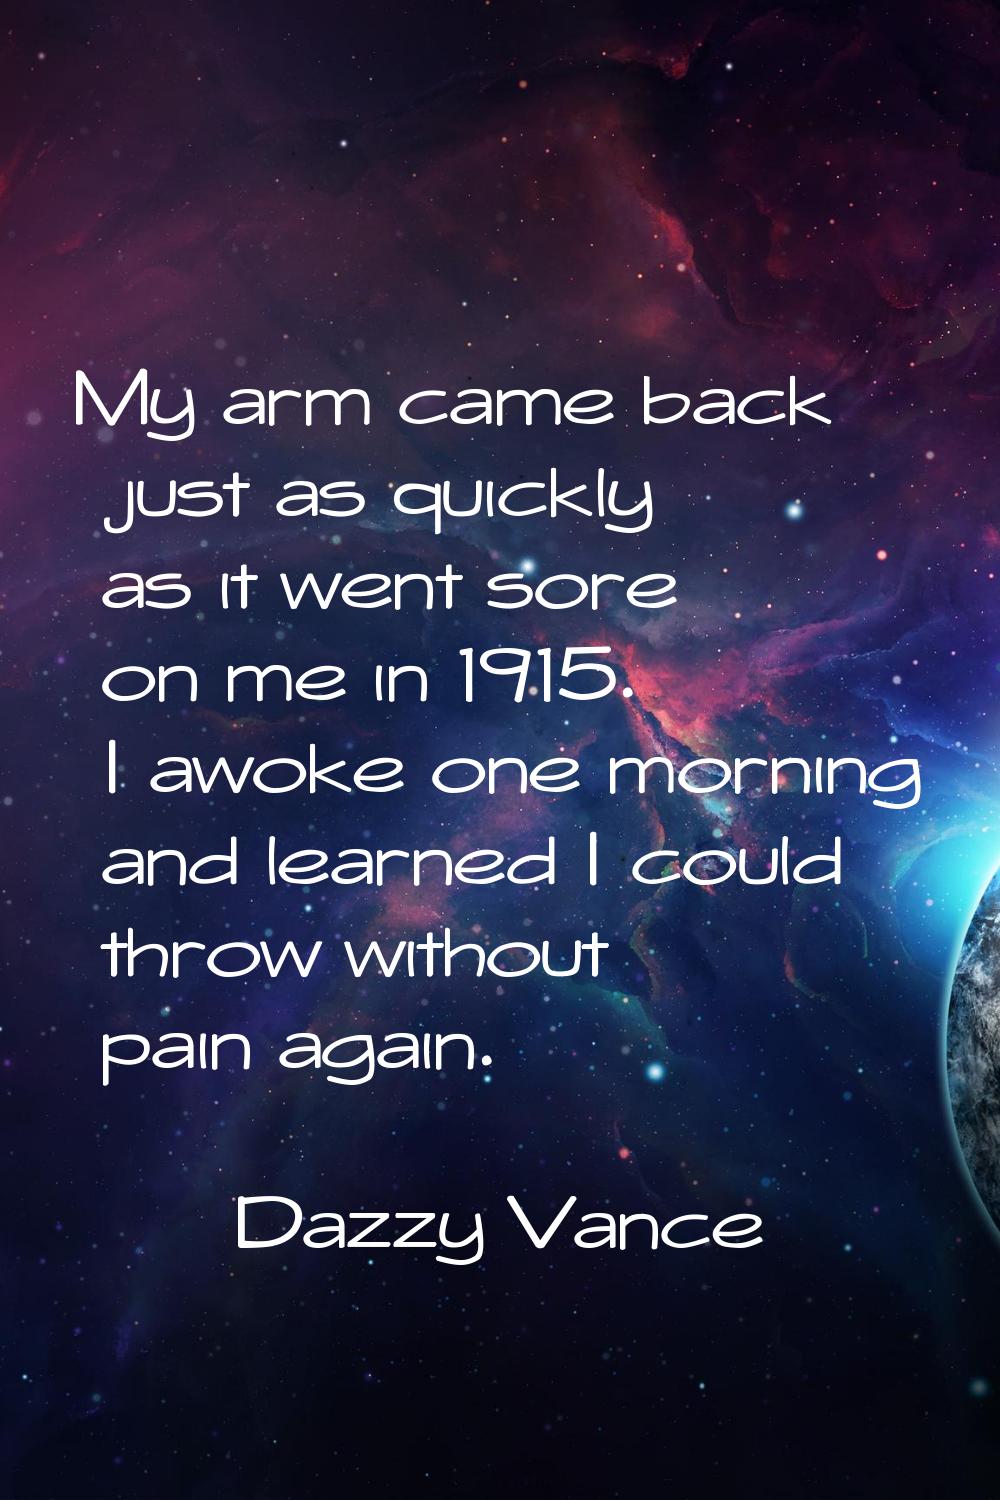 My arm came back just as quickly as it went sore on me in 1915. I awoke one morning and learned I c